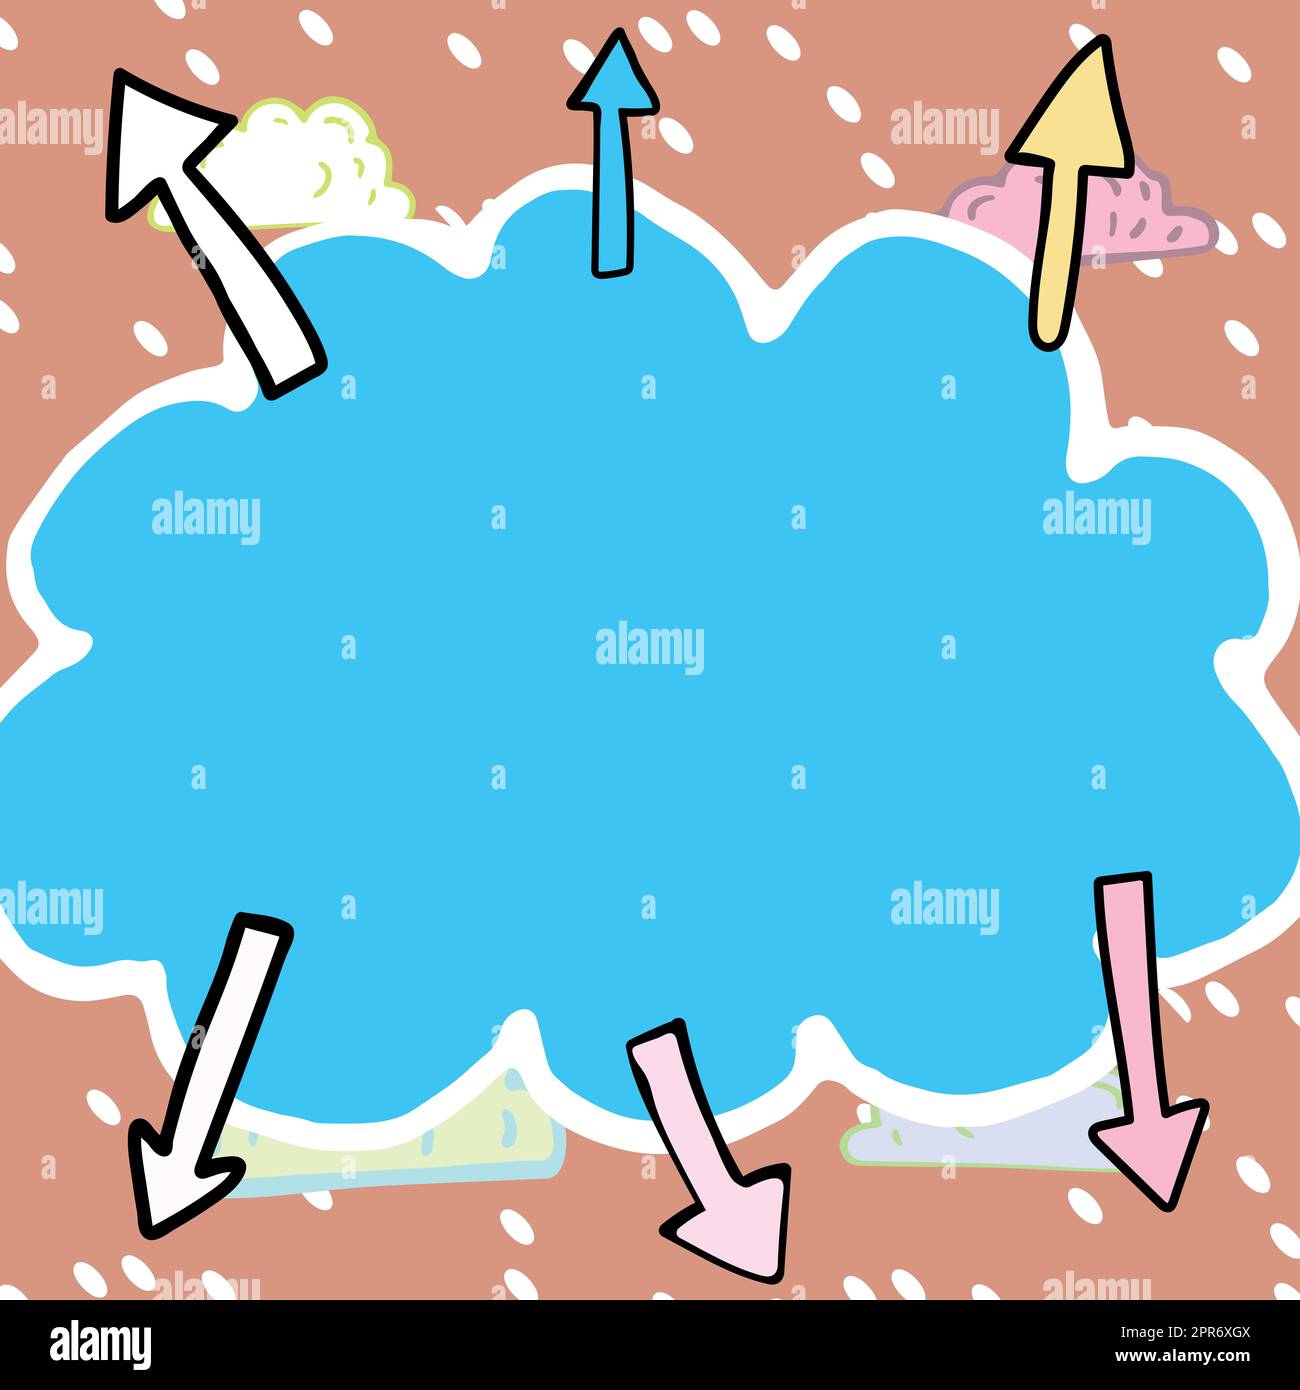 Important Messages Written In Shape Of Cloud With Arrows Around. Crutial Informations Presented In Cloudy Form With Snow In Background. Recent Ideas Diplayed. Stock Photo